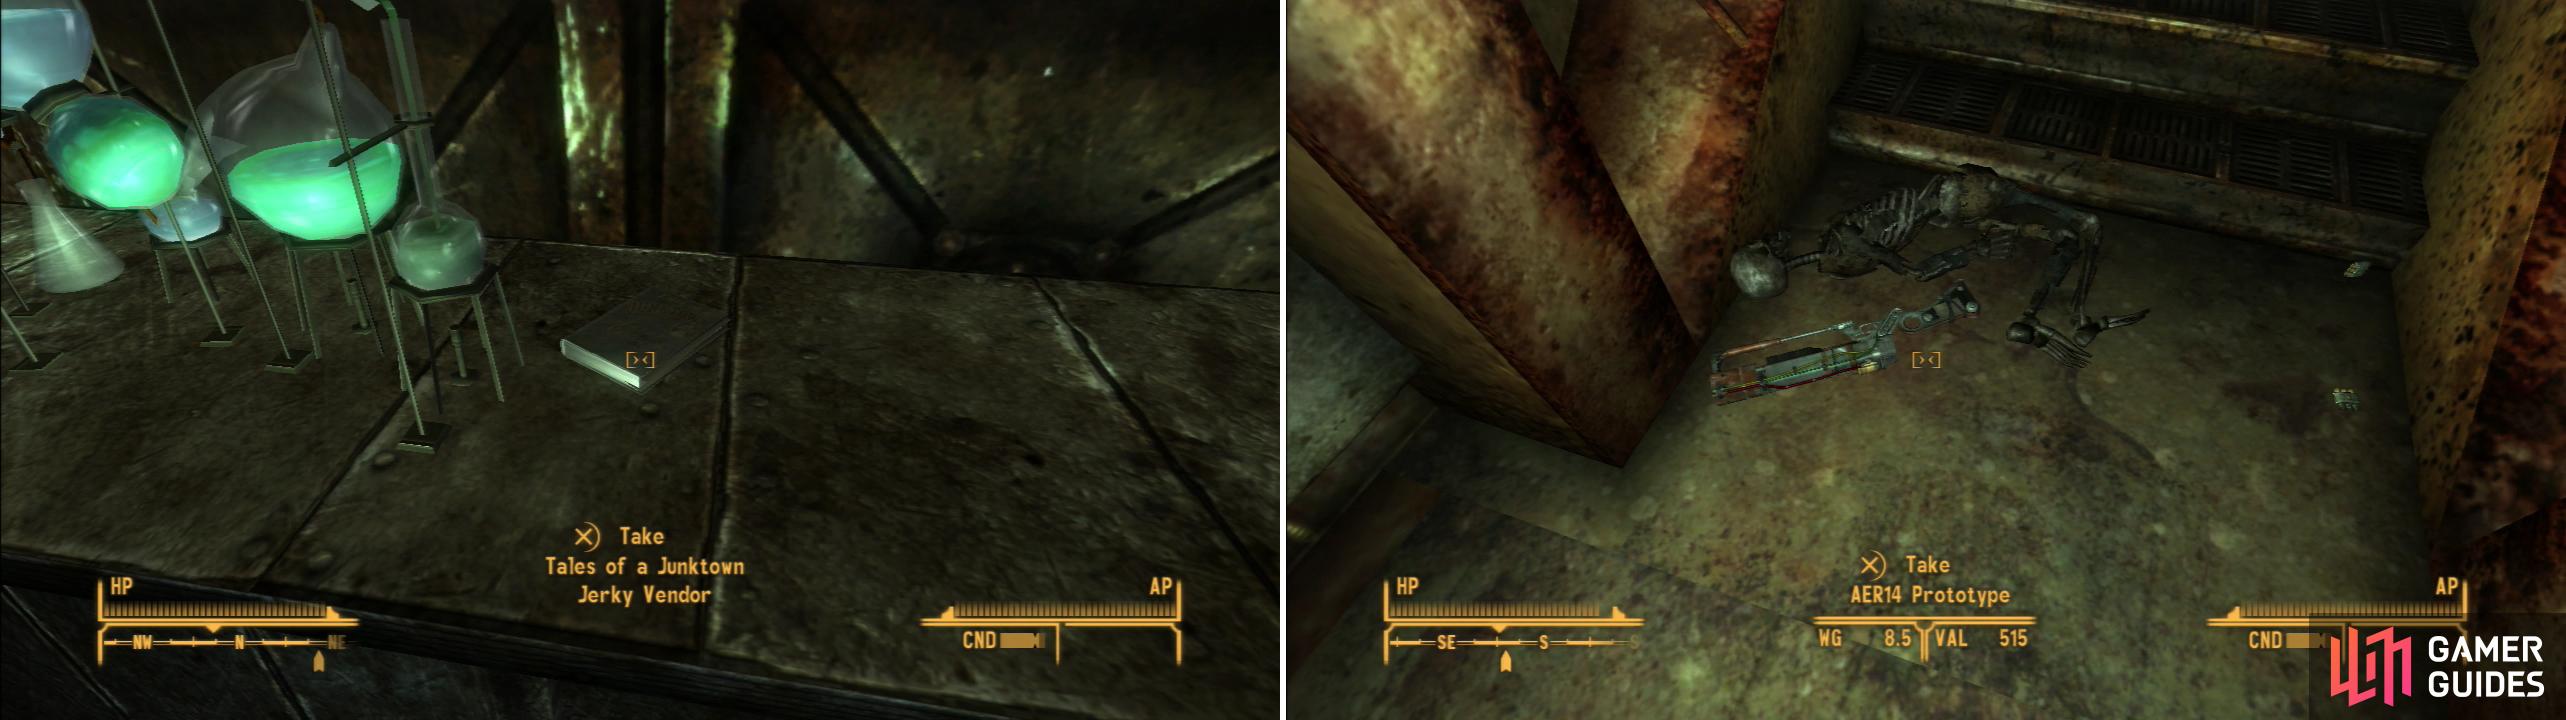 Grab a copy of Tales of a Junktown Jerky Vendor from a counter (left). The unique Laser Rifle - AER14 Prototype - can be found at the foot of an isolated staircase (right).